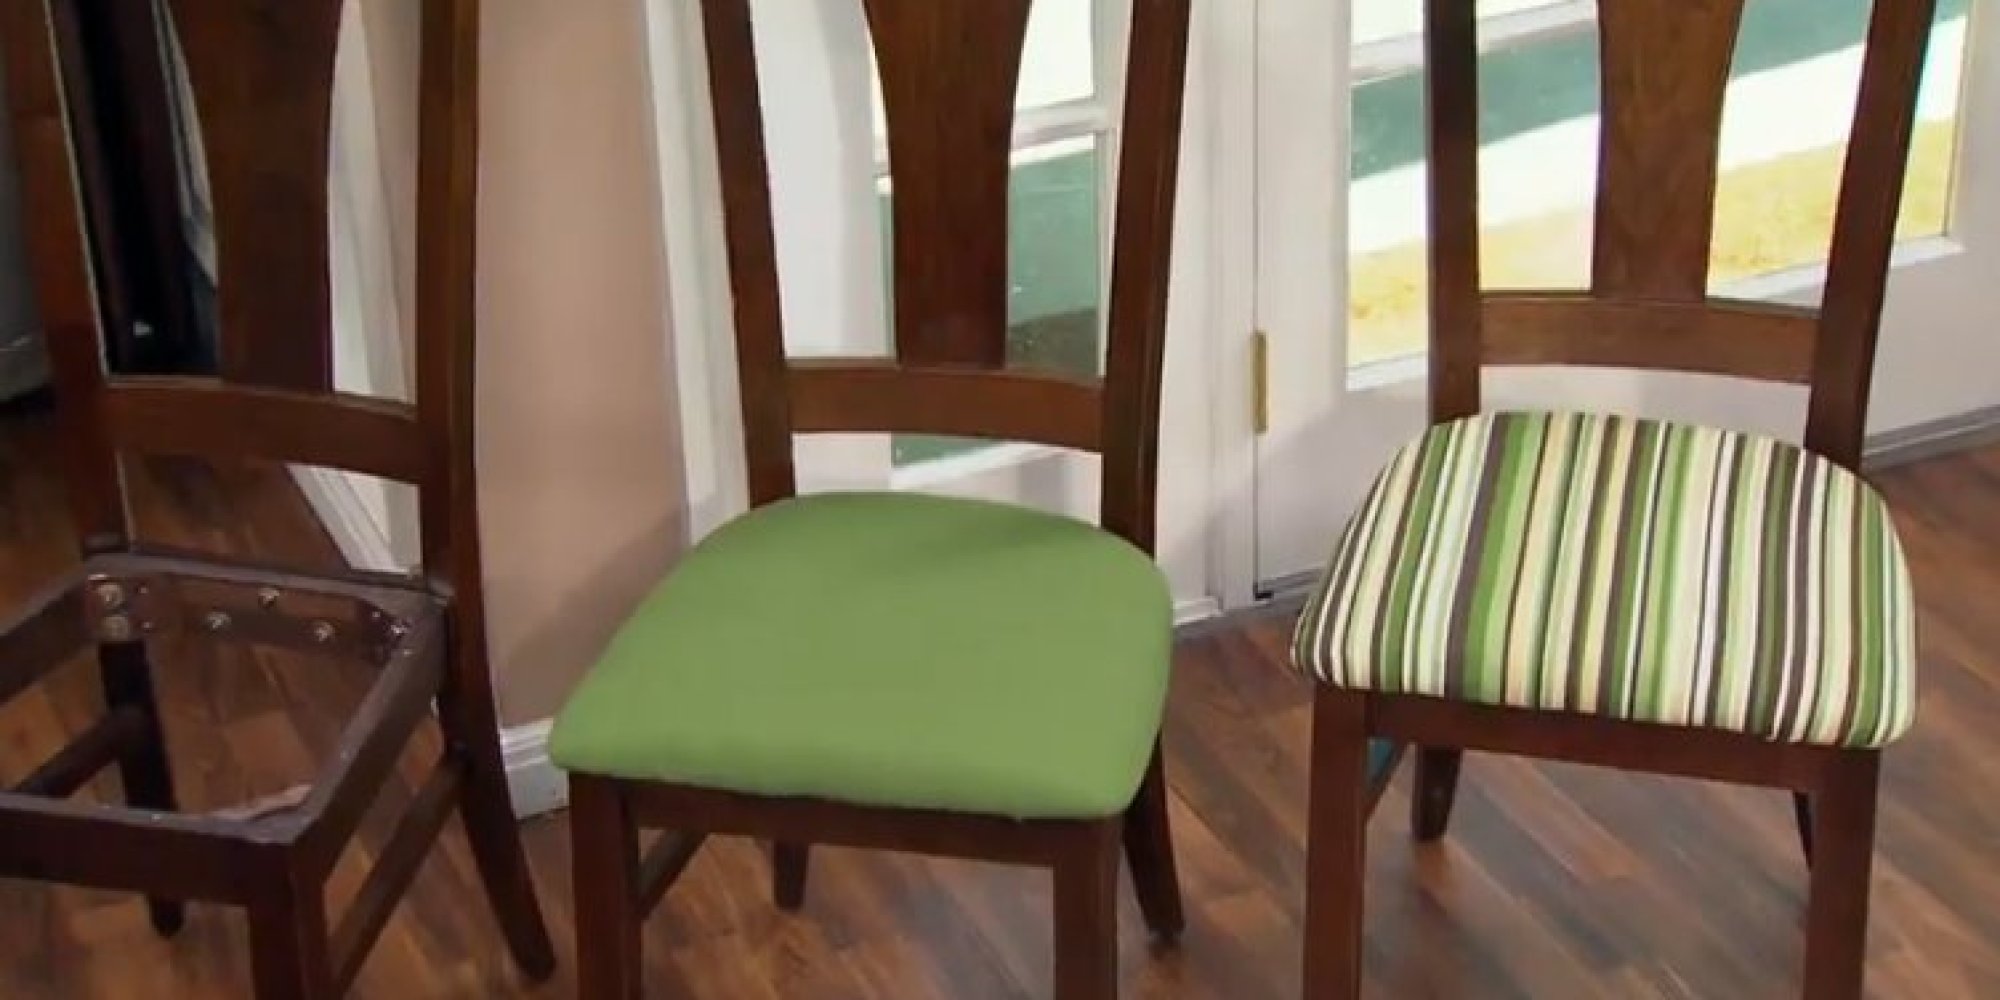 ugly dining room chairs